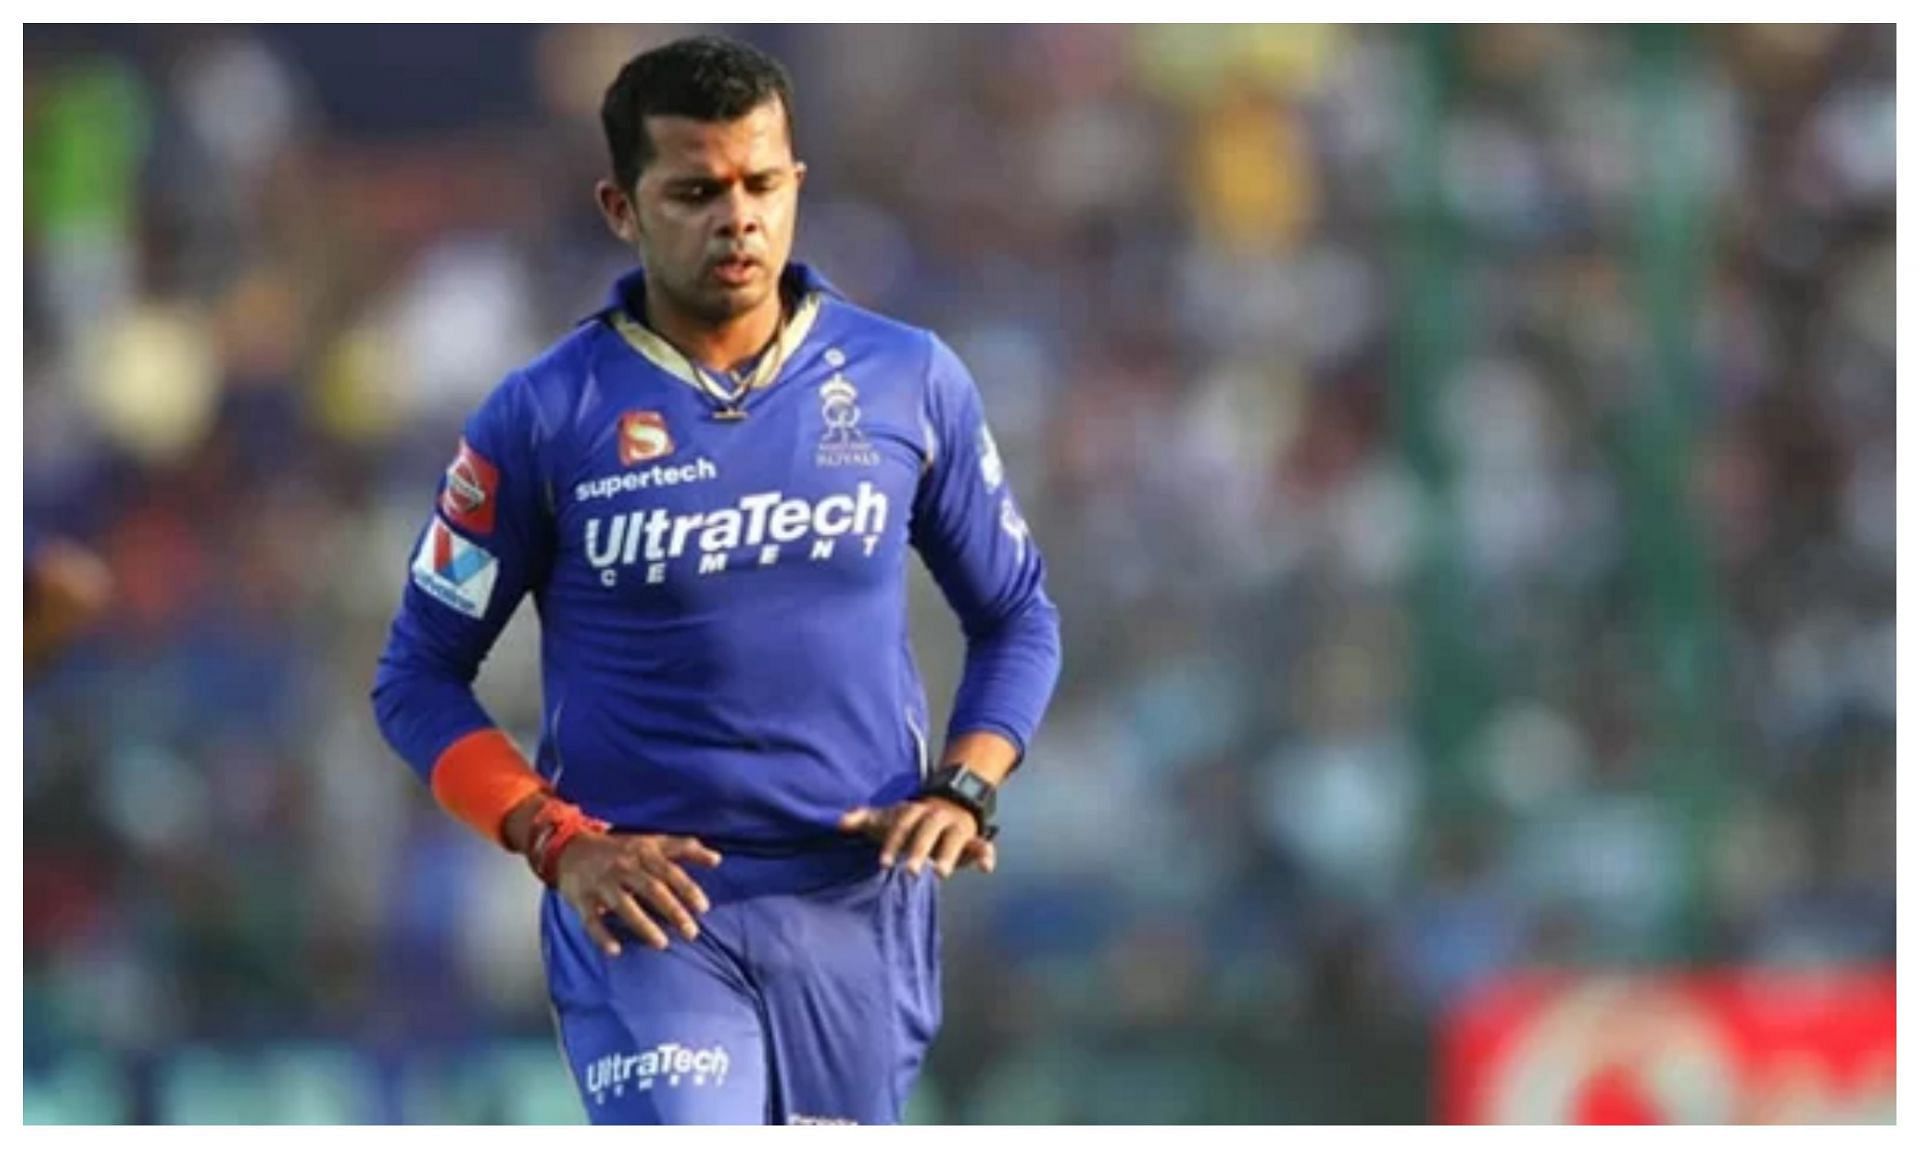 S Sreesanth played his last IPL game in 2013